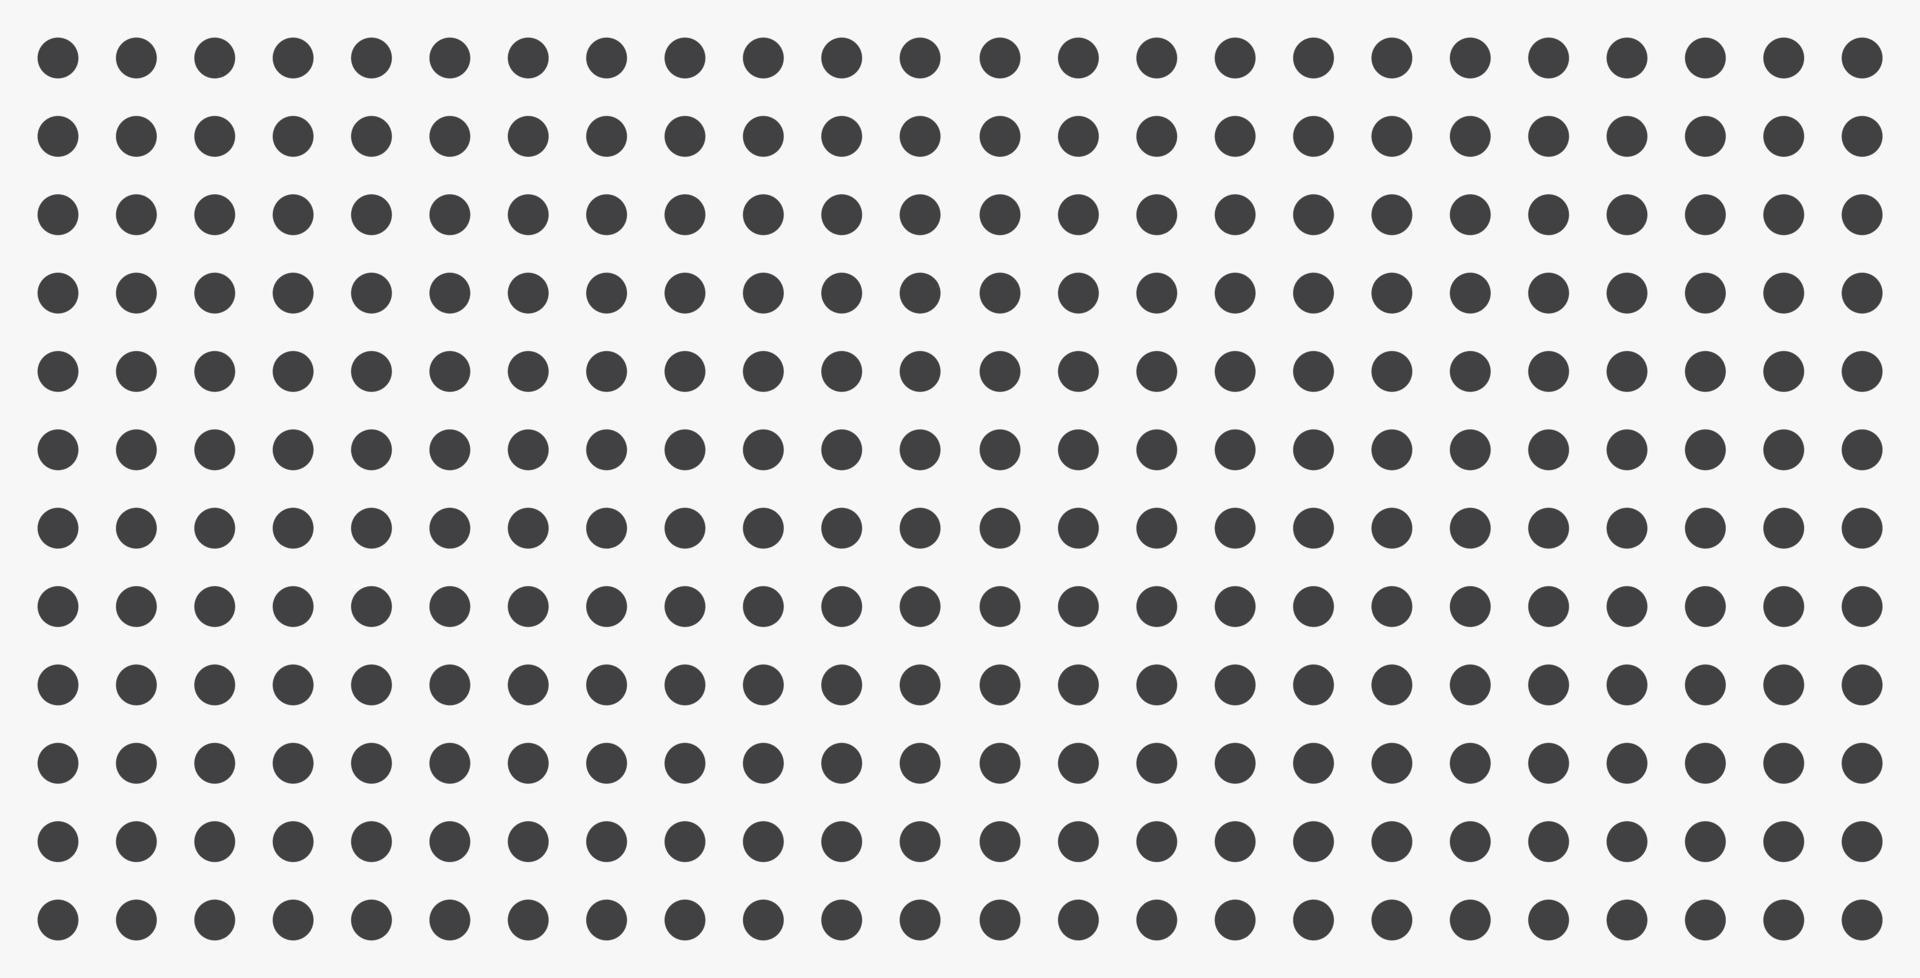 dotted spot halftone pattern background. vector